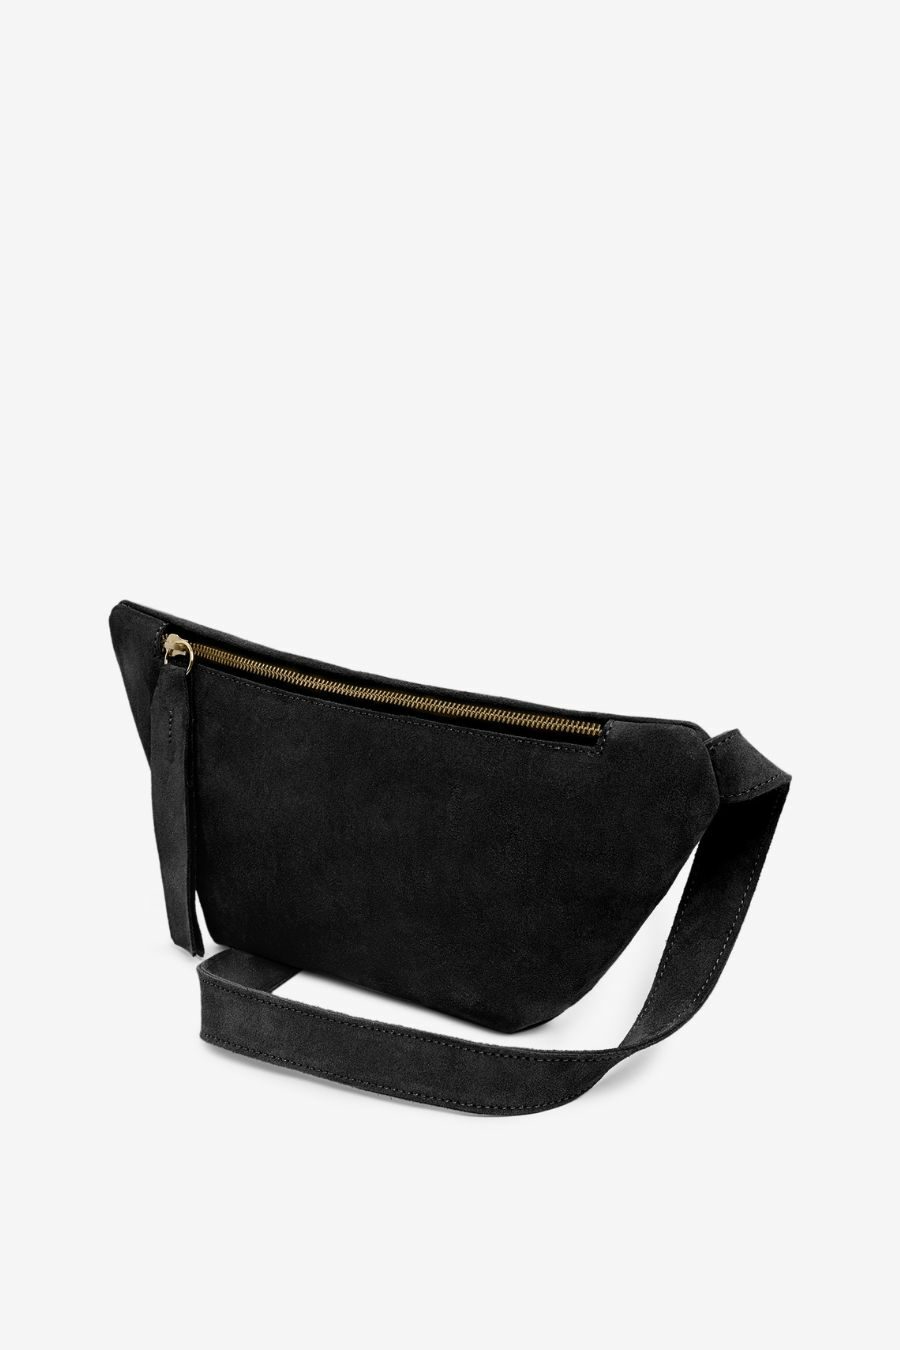 A suede bum bag style purse with an adjustable strap to go with you wherever and everywhere. The leather used to create this bag is completely abuse free. Ethically made in Portugal. Rita Row sold at Thread Spun.